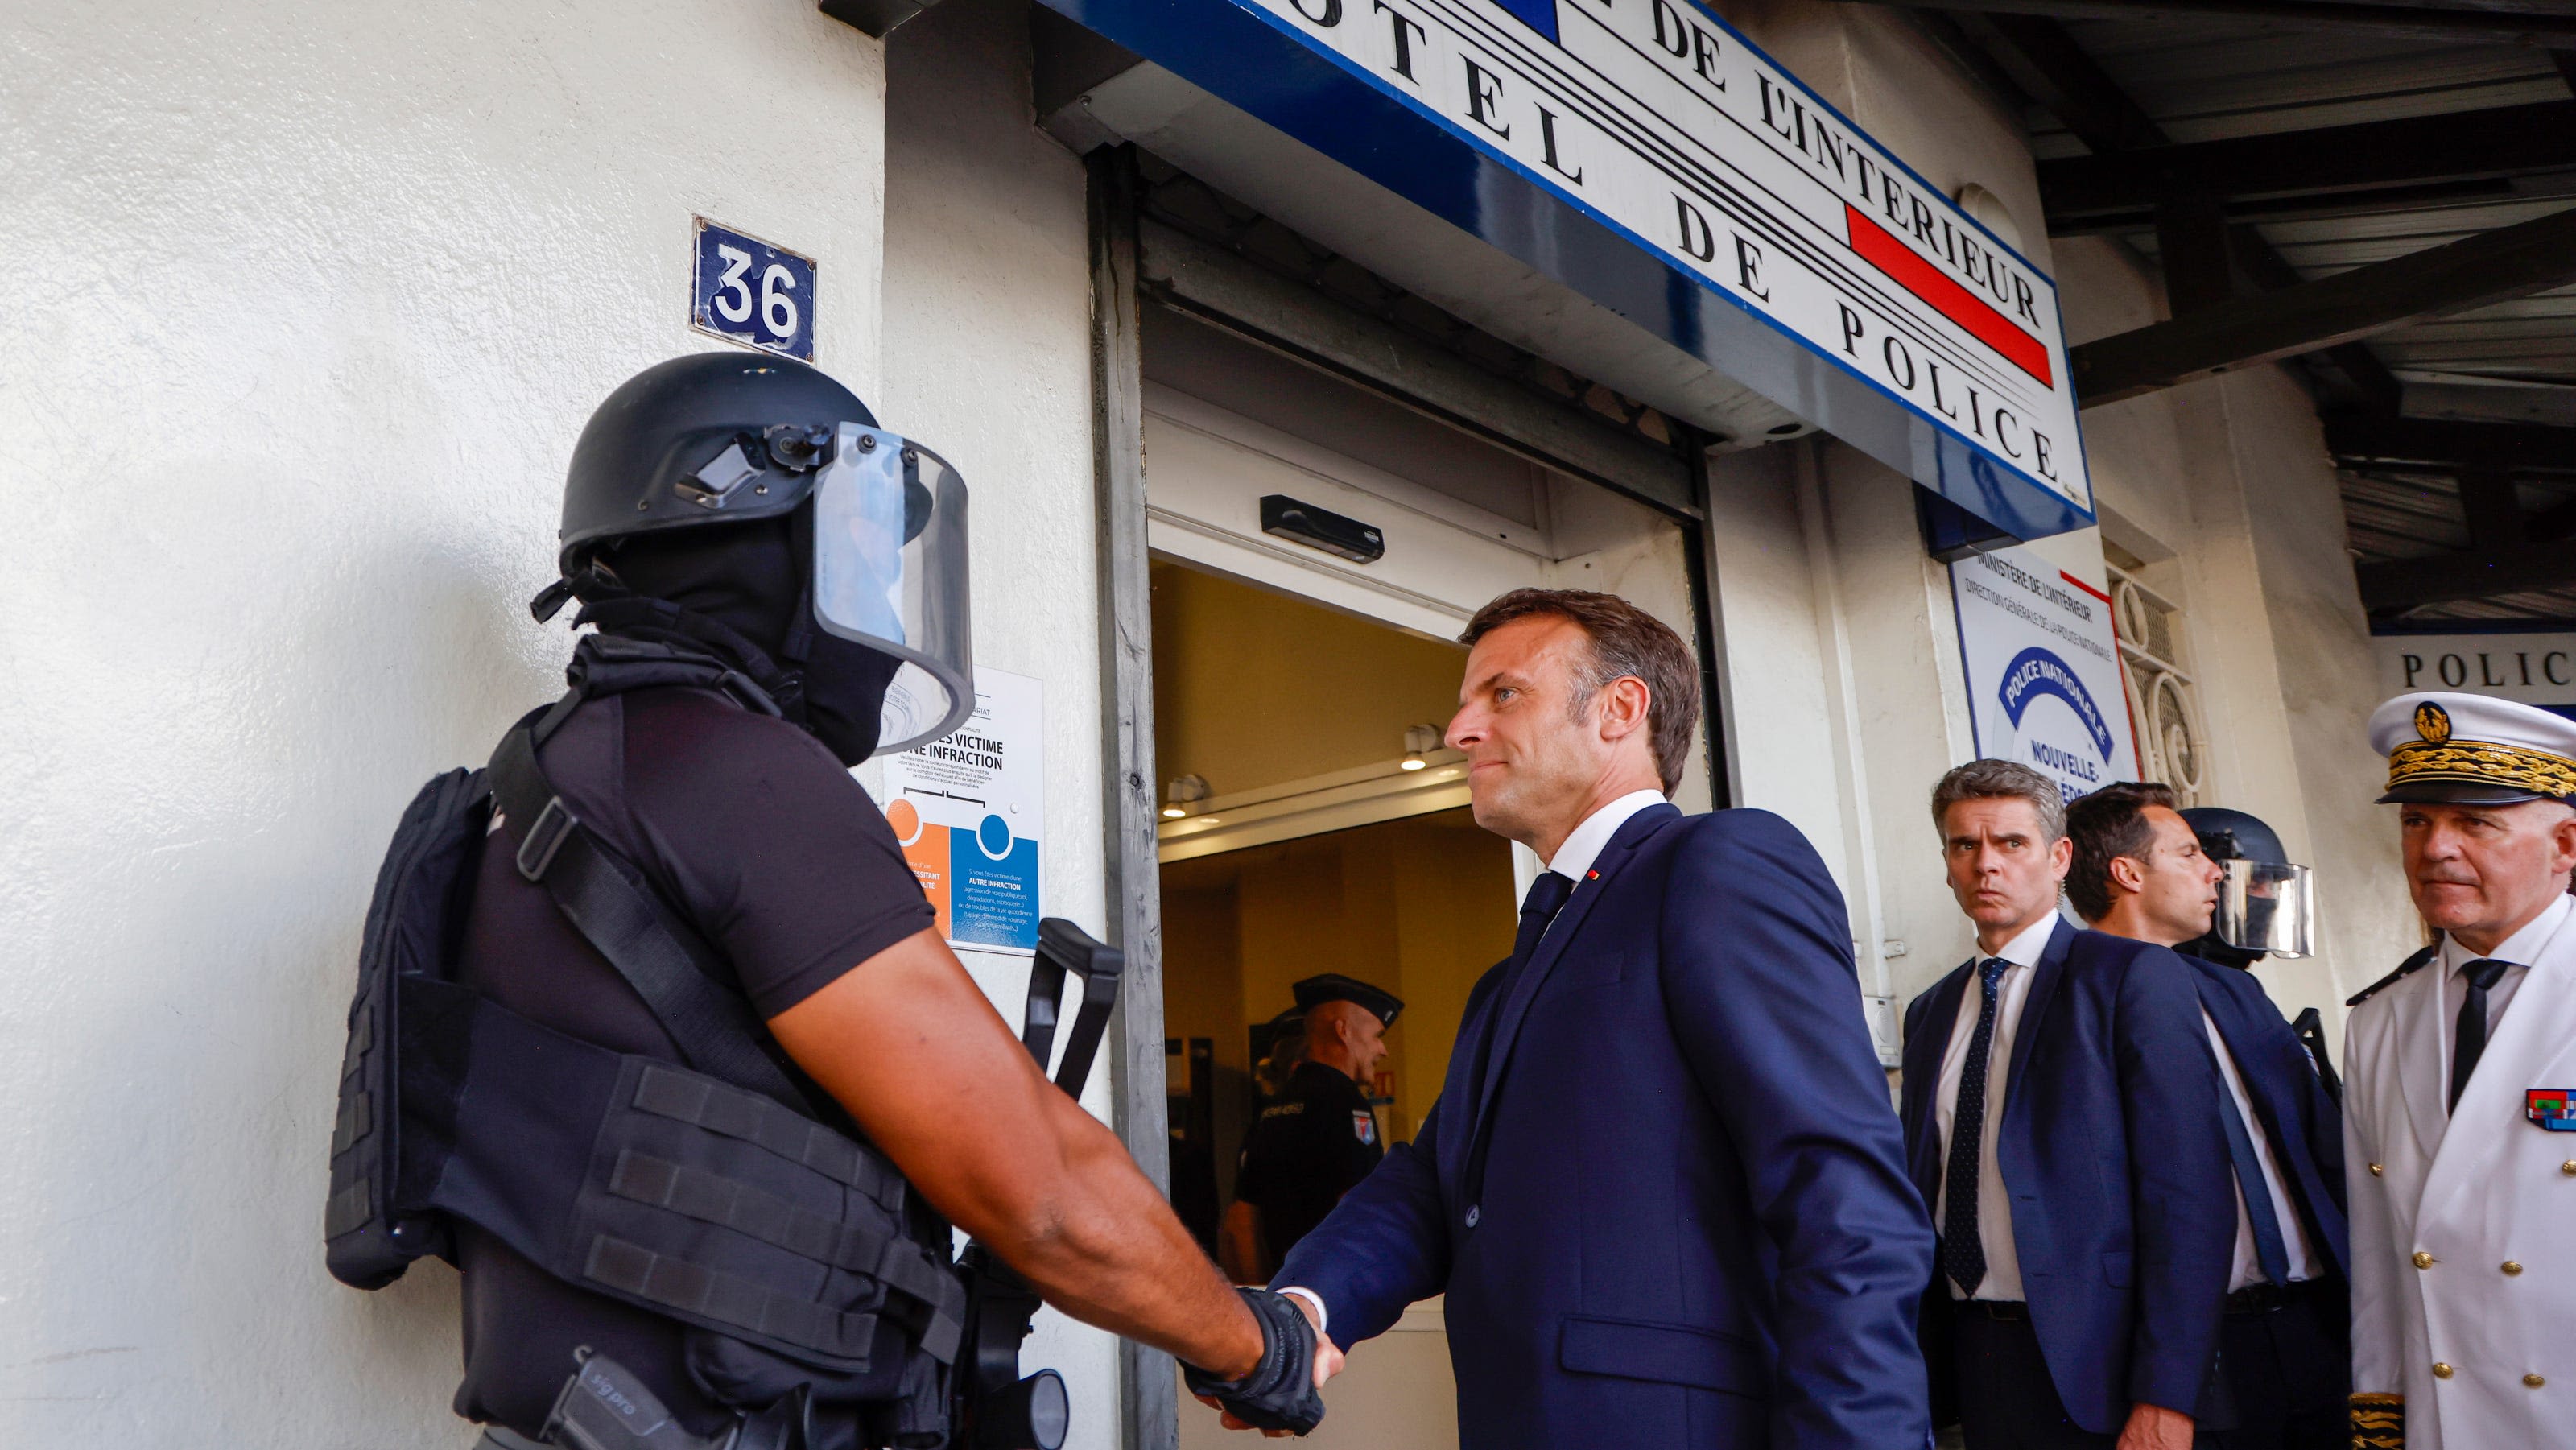 In riot-hit New Caledonia, French President Macron says the priority is a return to calm